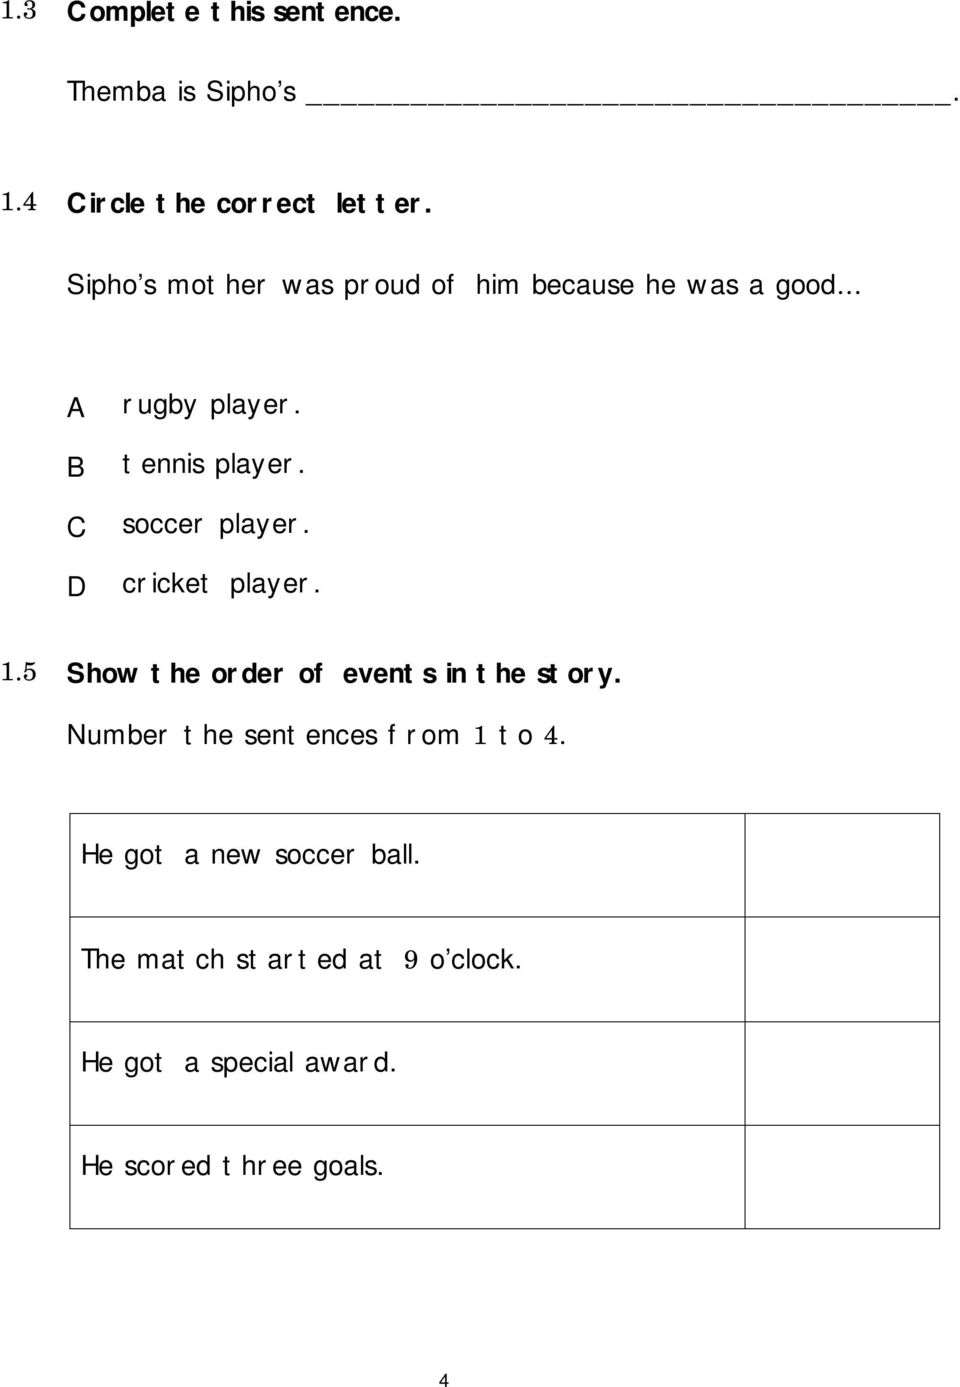 soccer player. cricket player. 1.5 Show the order of events in the story.